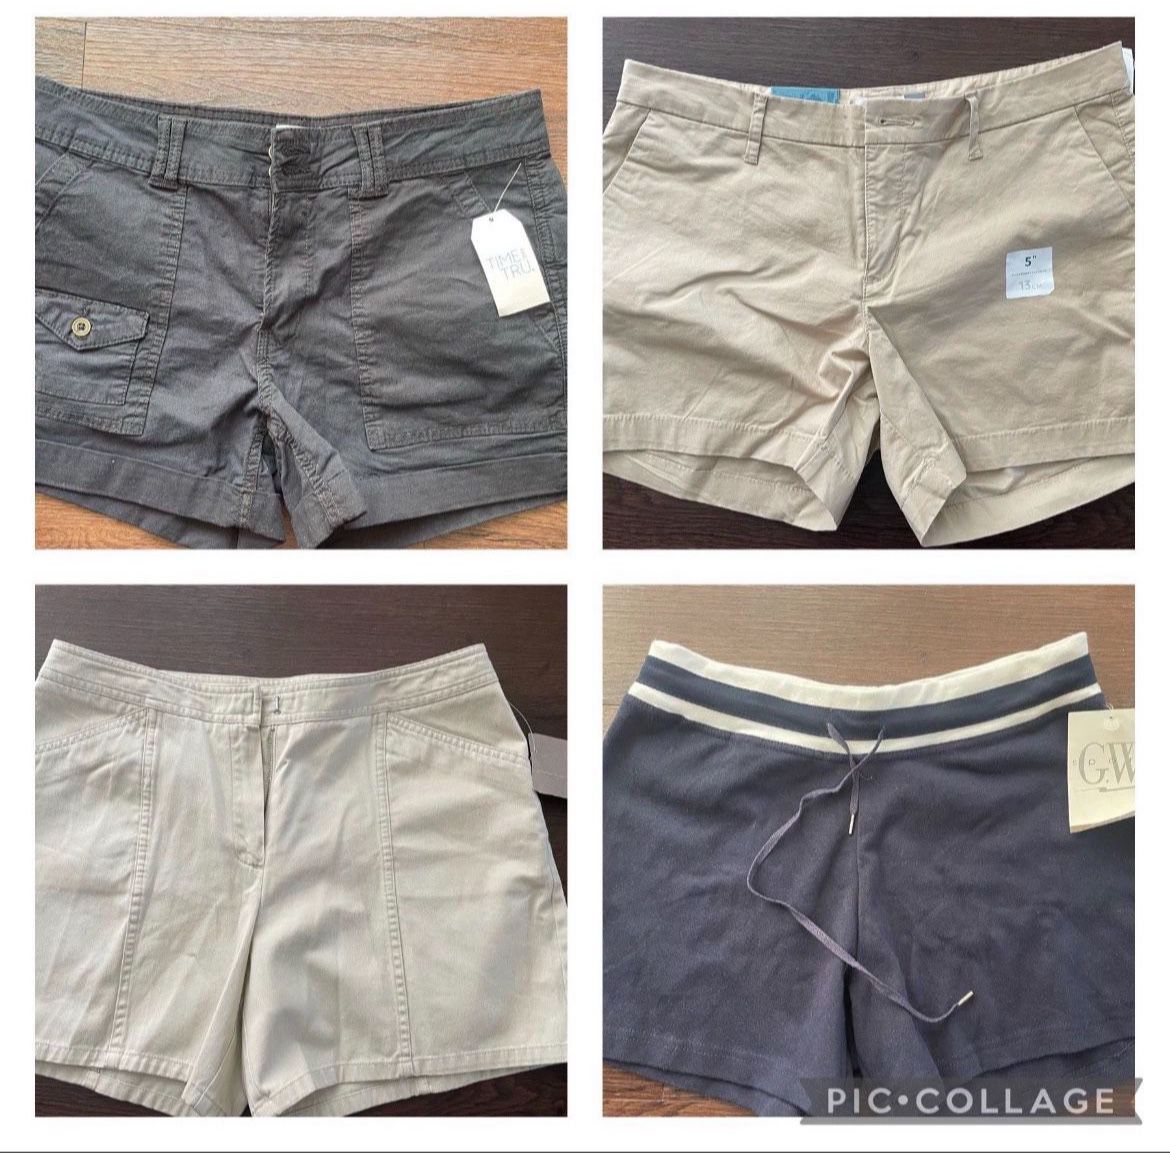 New Woman Shorts , Size 8 $10 for each, $30for all 